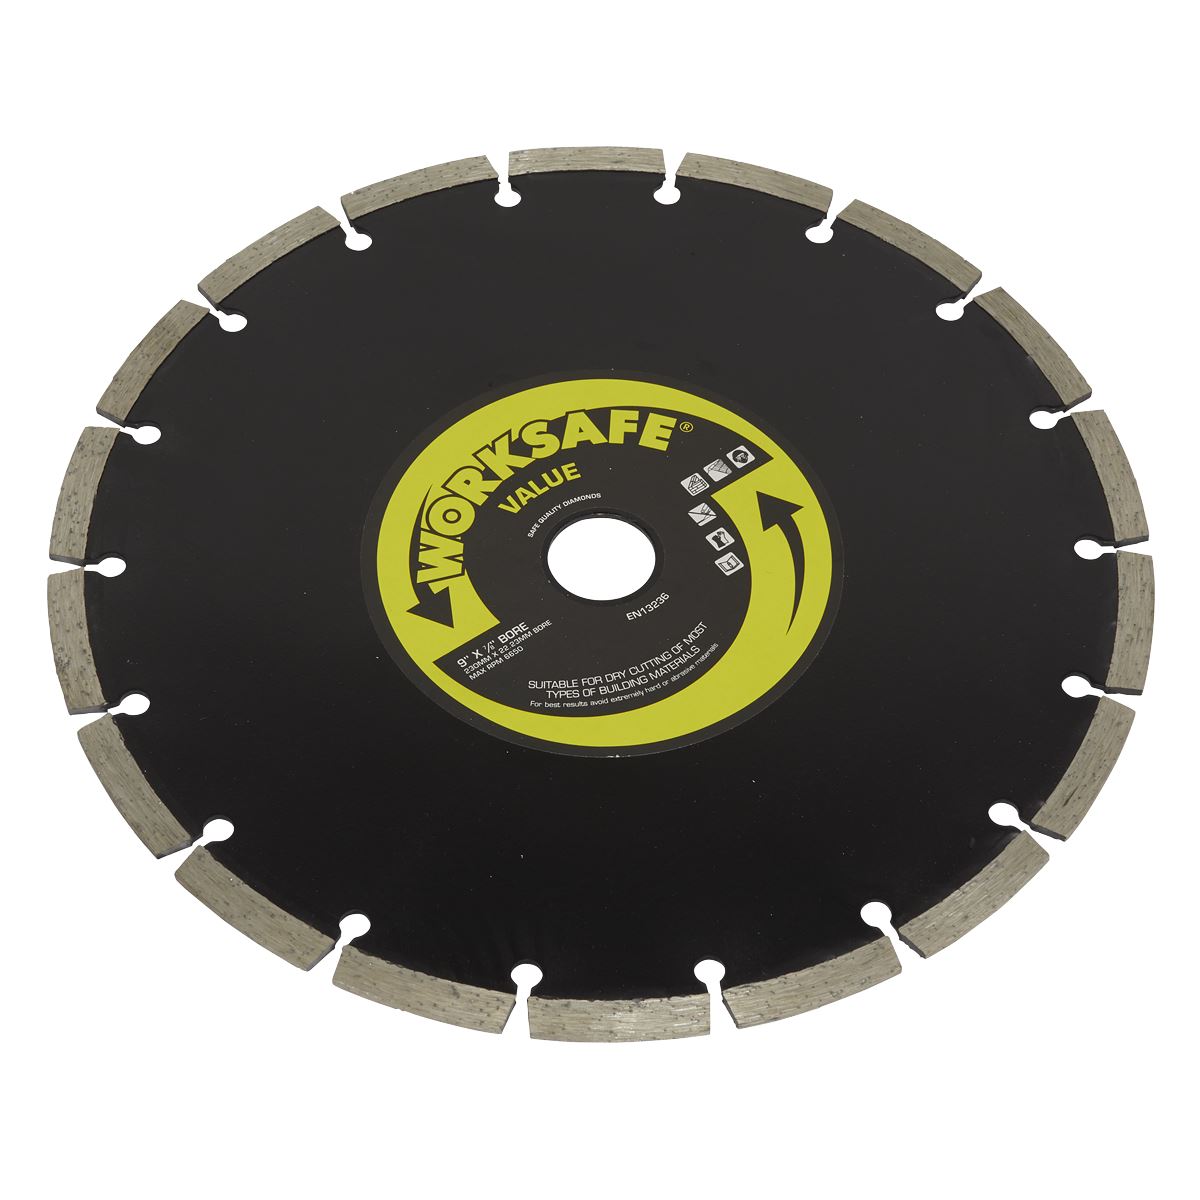 Worksafe by Sealey Diamond Cutting Blade 230mm x 22.23mm Bore Value